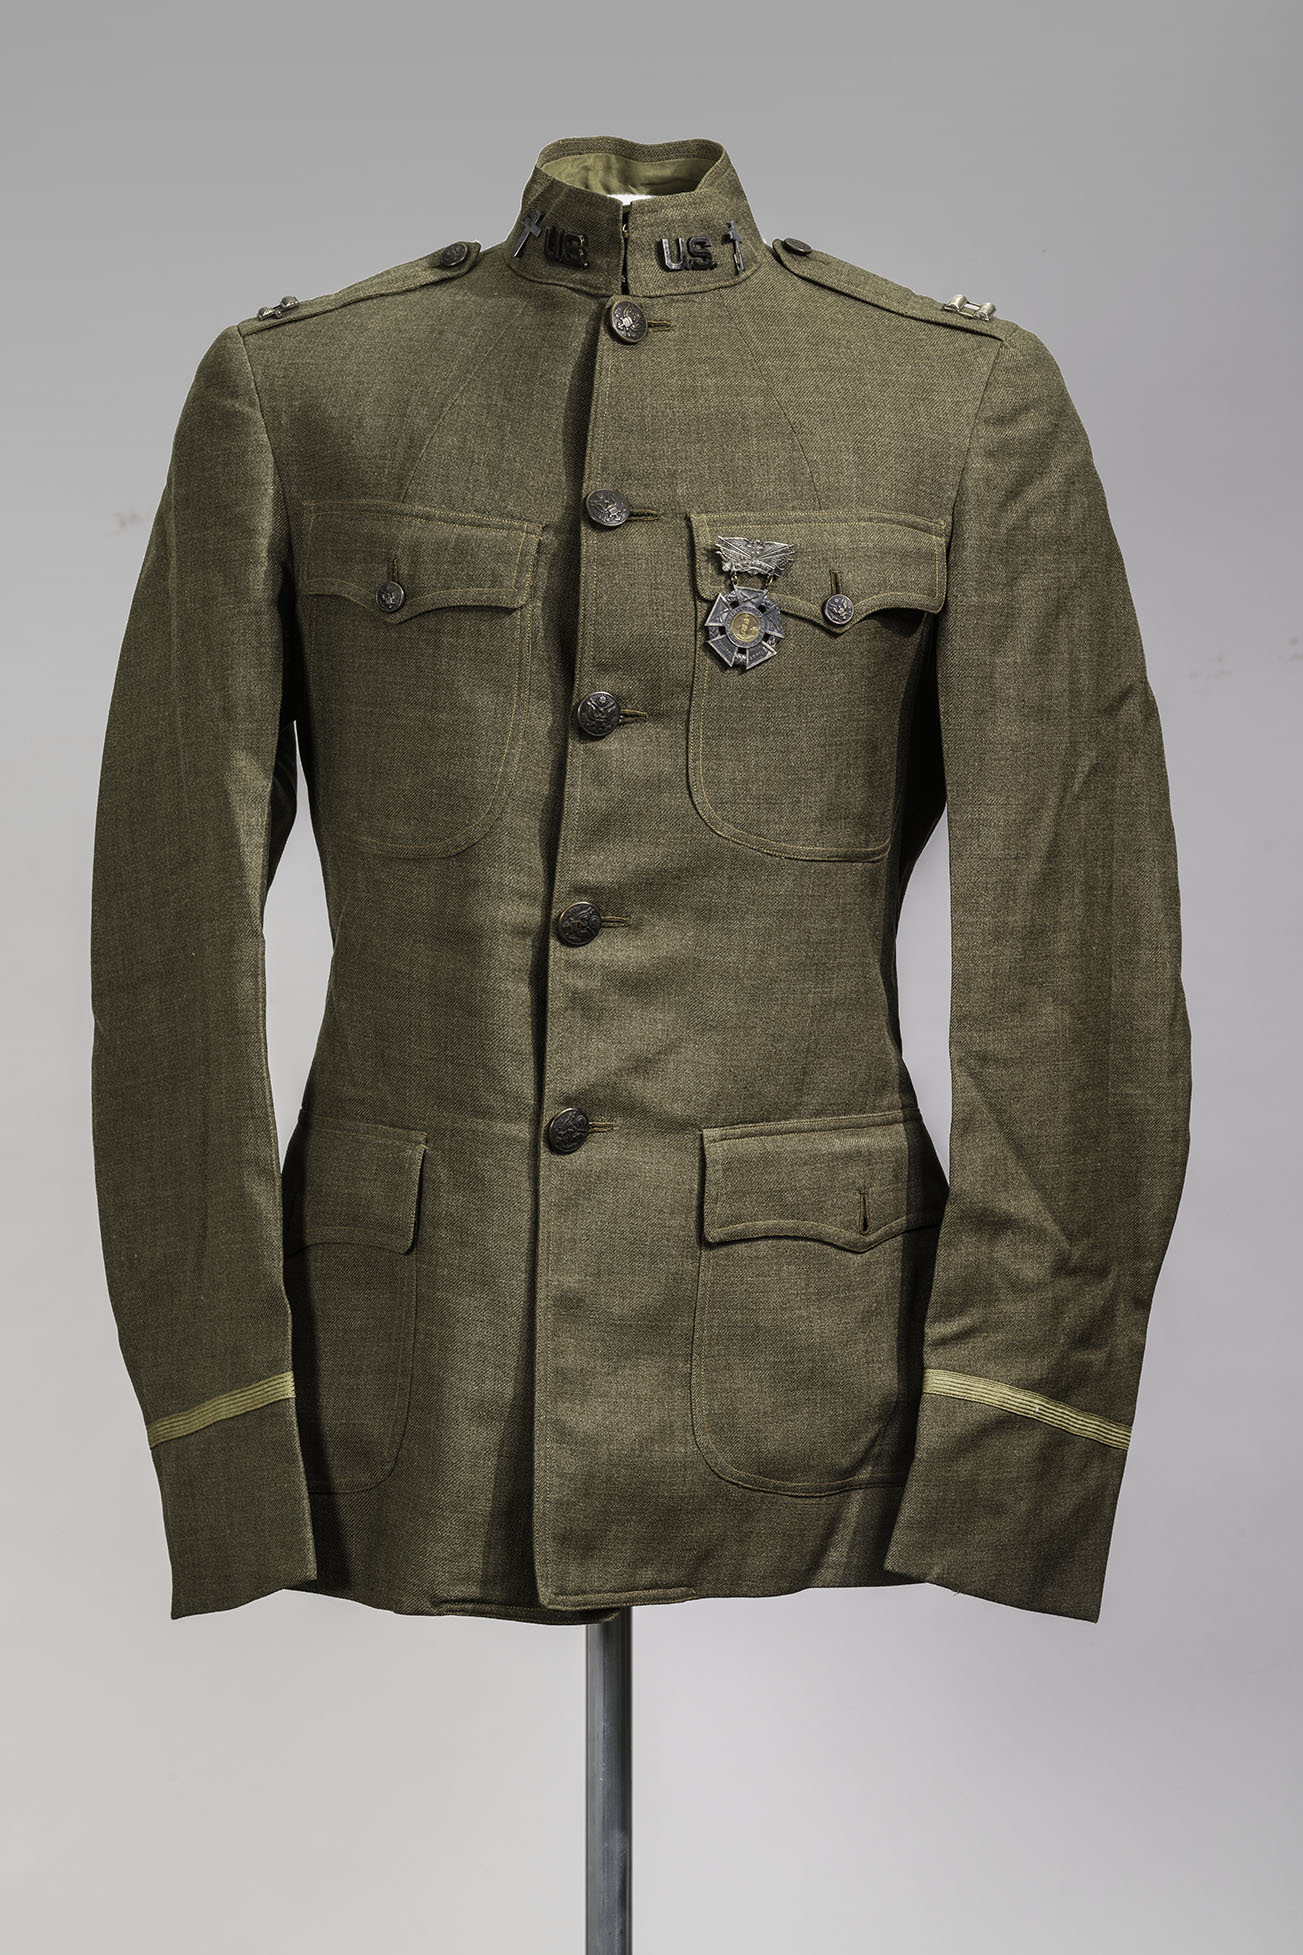 Modern photograph of an olive-green military tunic that buttons up the front and has four pockets, displayed on a dress form.